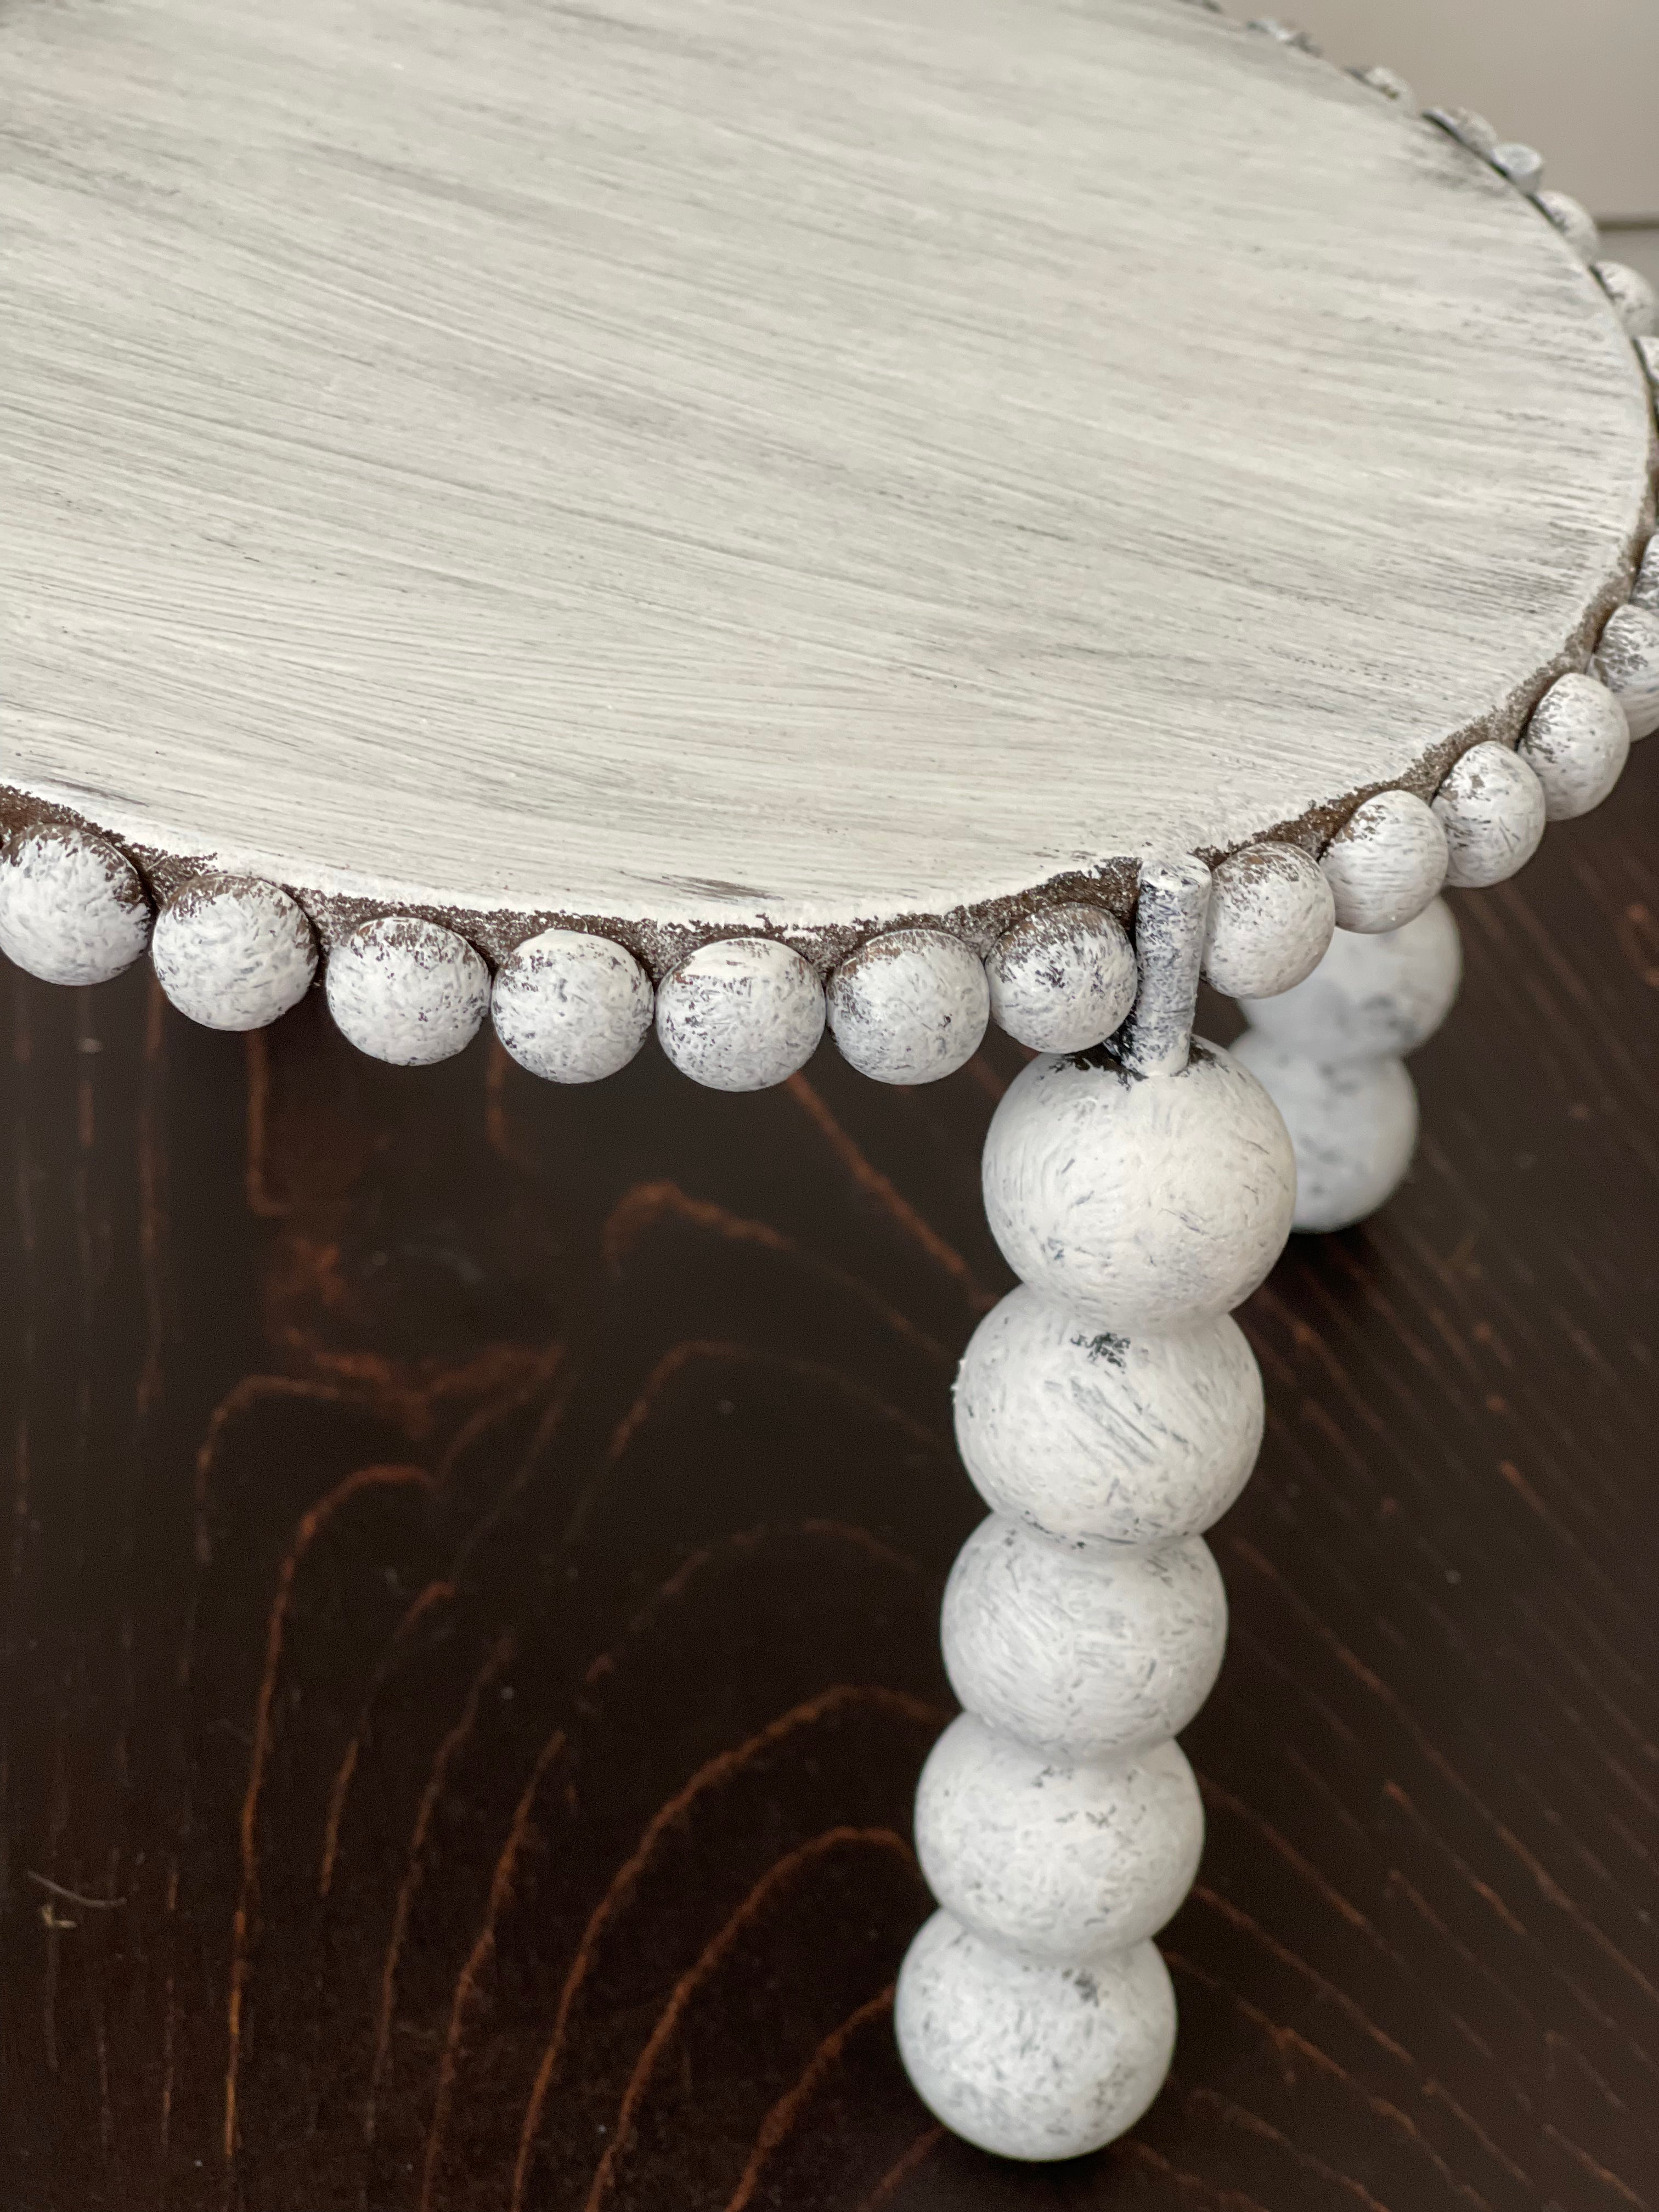 This image shows the white distressed beads.